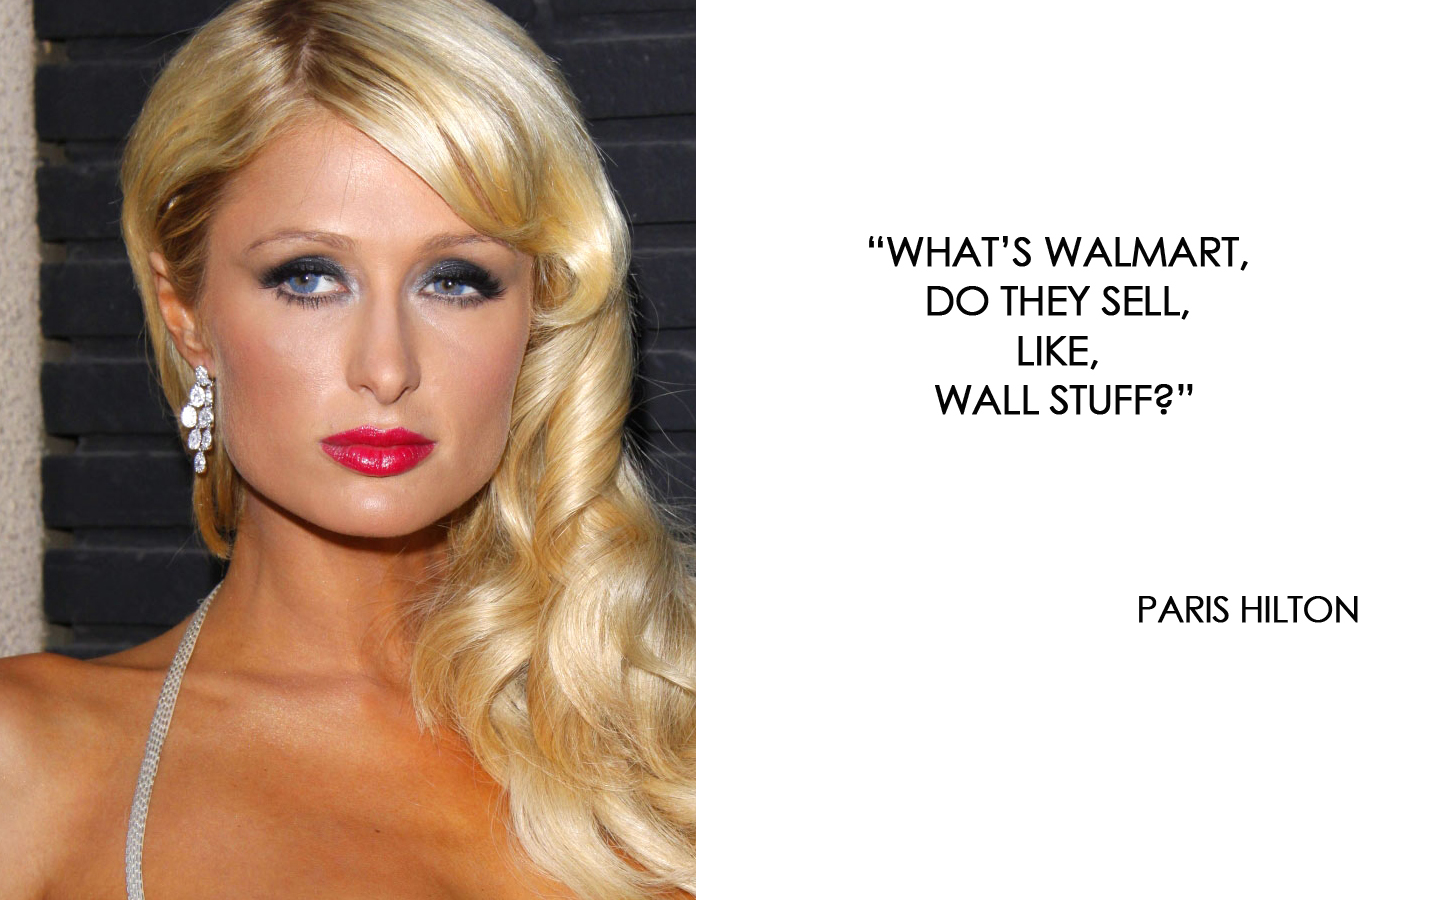 "What'S Walmart, Do They Sell, , Wall Stuff?" Paris Hilton